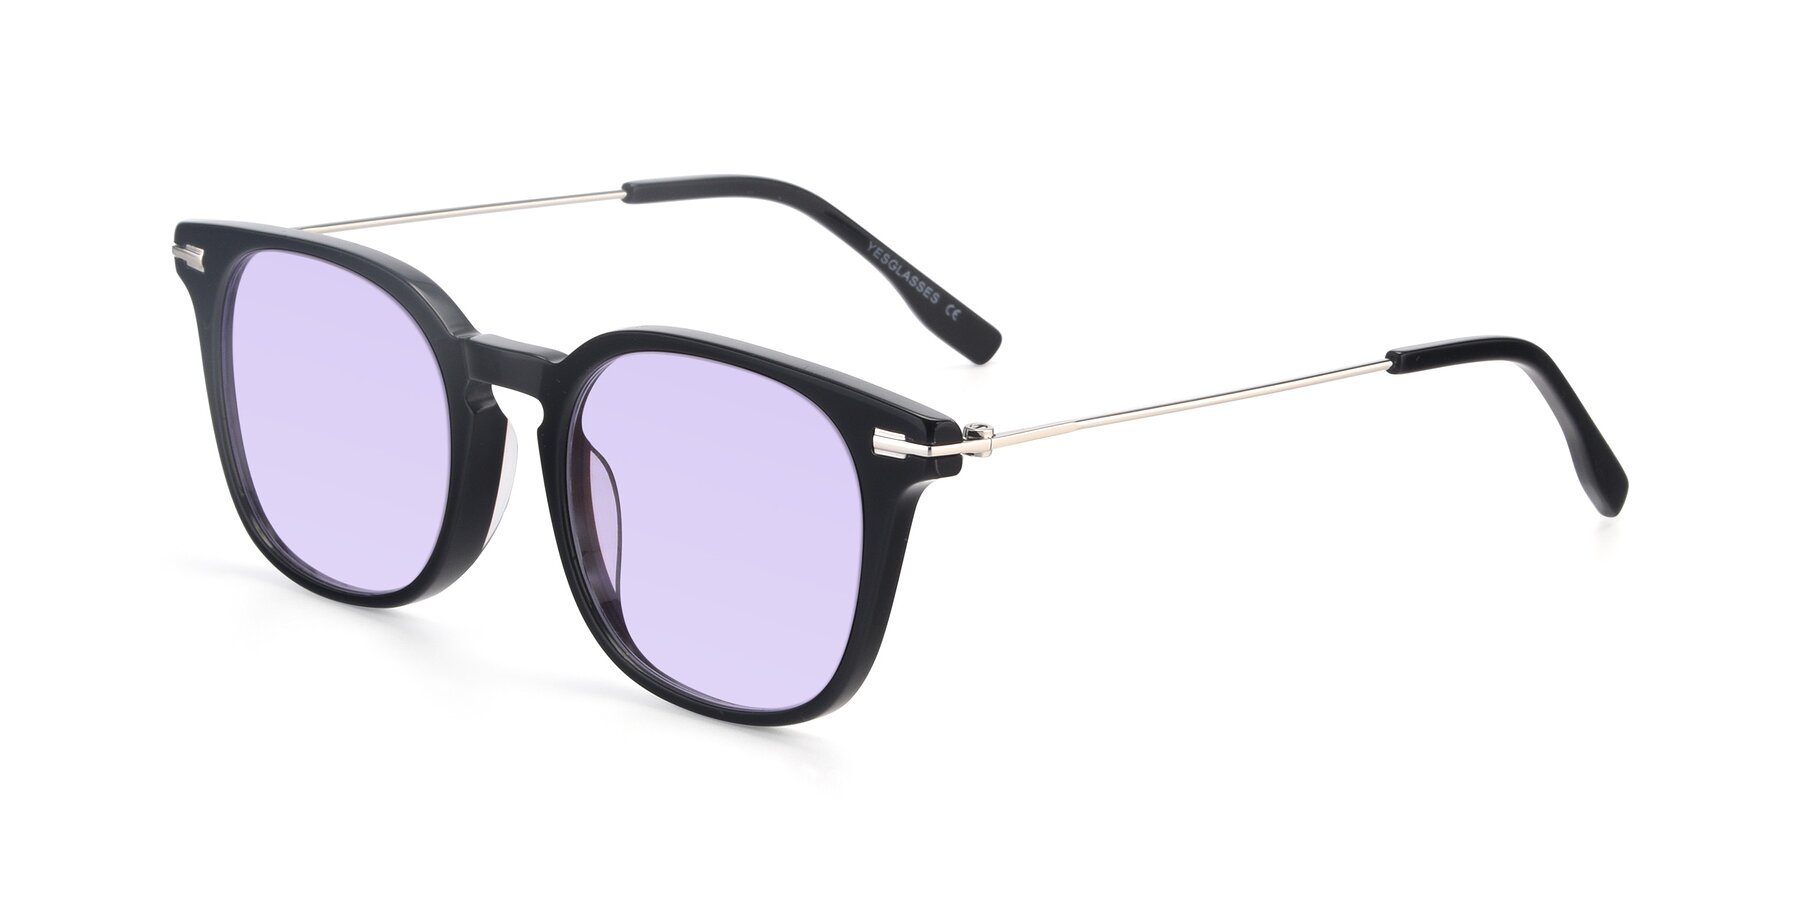 Angle of 17711 in Black with Light Purple Tinted Lenses